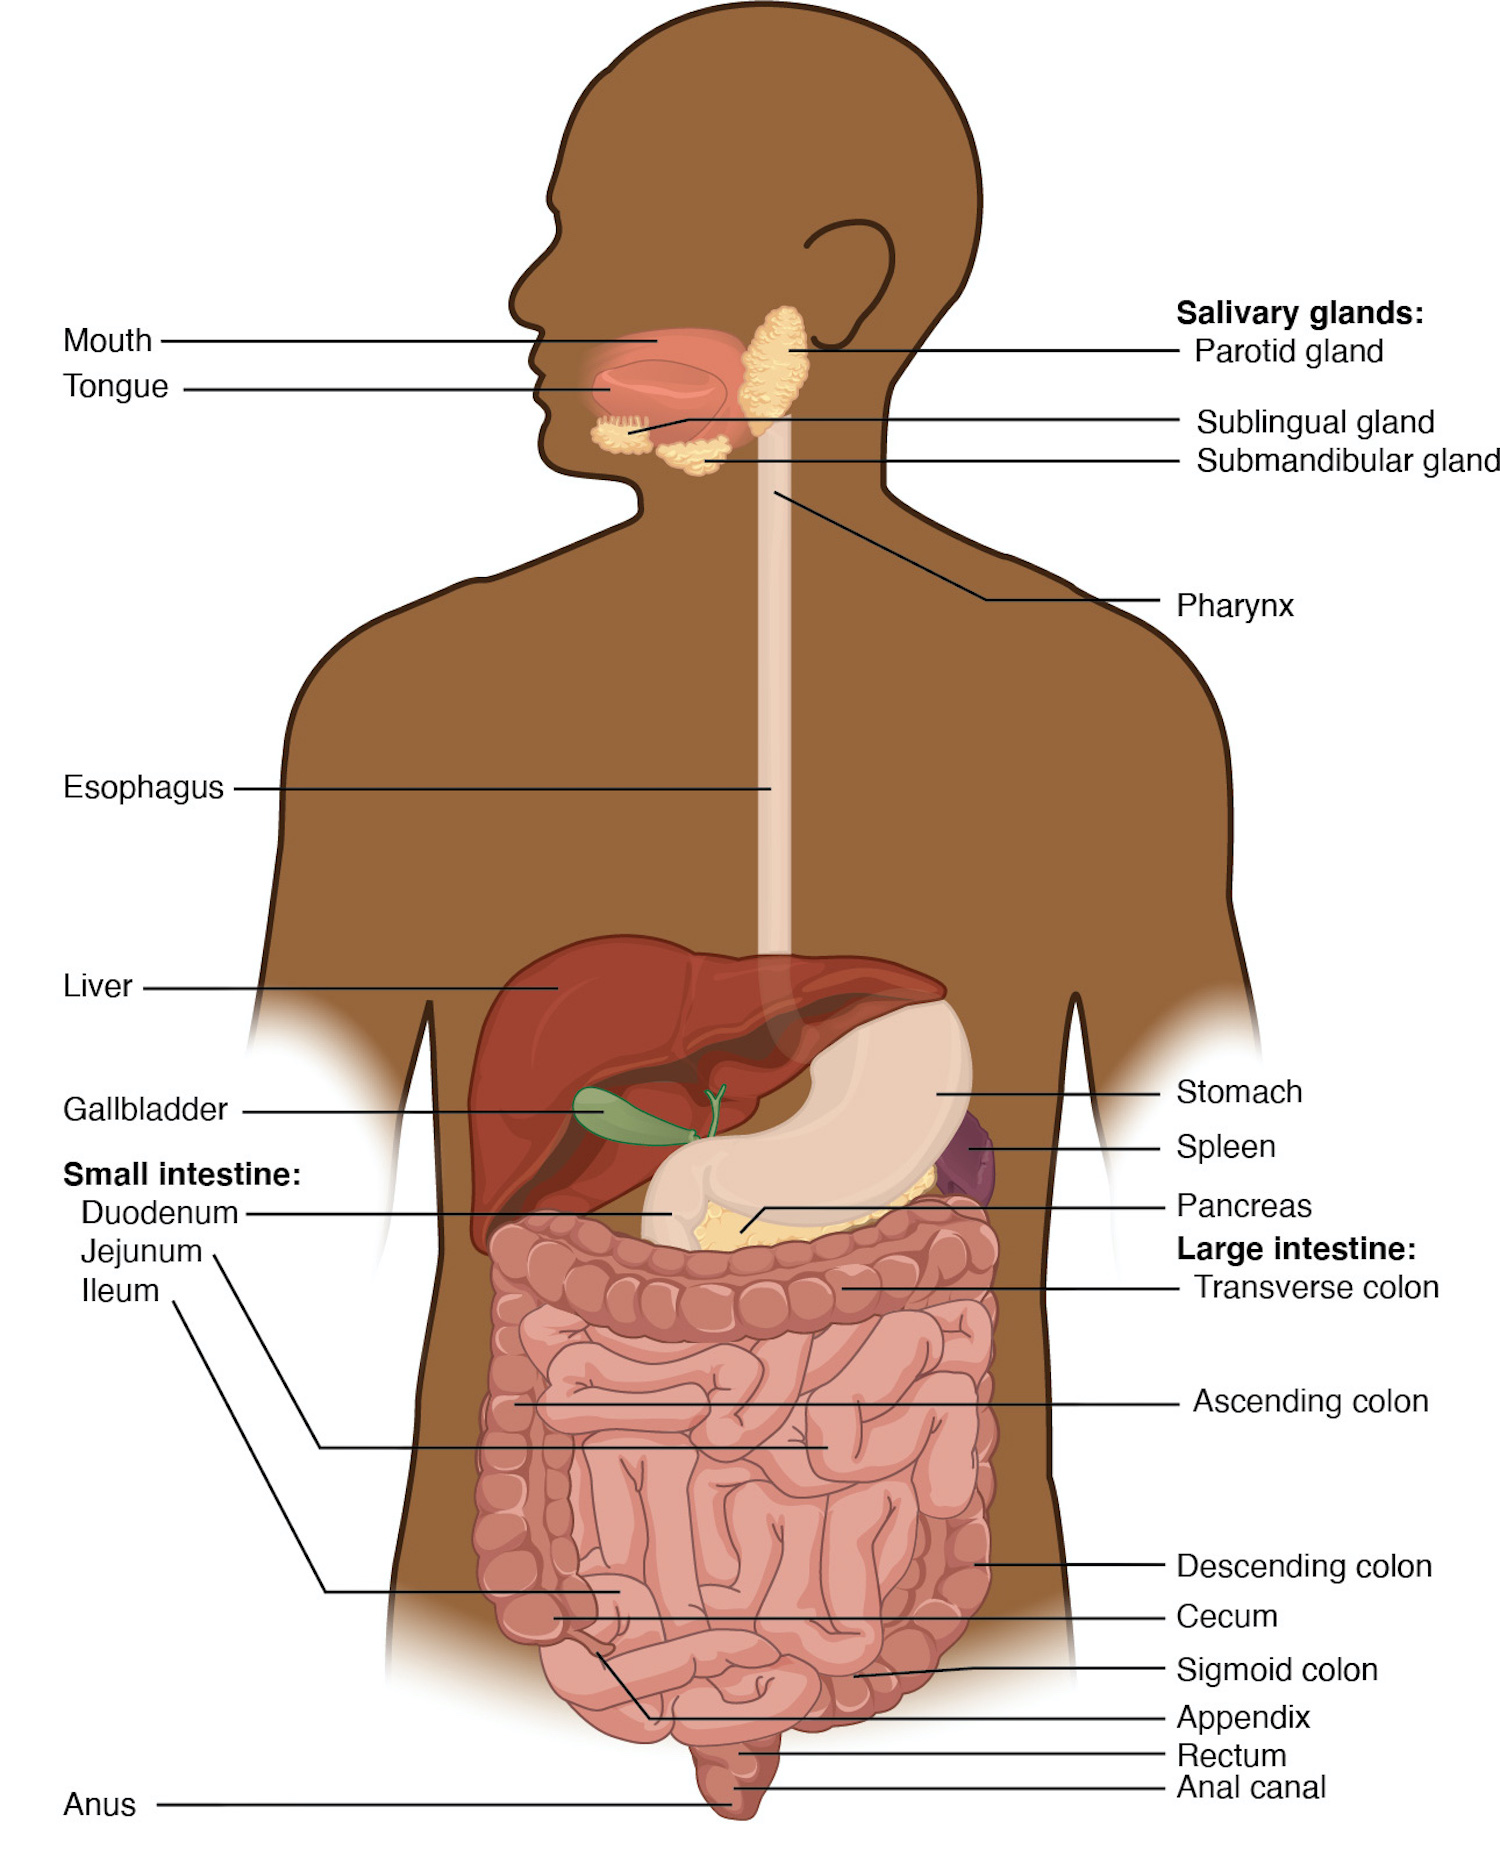 Cartoon that shows the components of the digestive system. From top to bottom: Mouth and Tongue.  Salivary glands: Parotid gland (behind the mouth), sublingual gland is below the tongue.  The submandibular gland is located behind the sublingual gland. The mouth is connected to the pharynx which leads into the esophagus.  The esophagus enters the stomach.  To the left of the stomach is the liver.  Enbedded in the liver is the gallblader. The stomach is attached to the  Small intestine.  The small intestine is composed of the Duodenum, the Jejunum and the Ilium.  The Illium  connects to the Ascending colon.  At the connection between the Illium is the Appendix, which is a blind ending sack.  The Assending colon is on the left side of the cartoon and connects to the Transverse colon that runs from left to right below the stomach.  The Descending colon runs on the right side down to the Rectum and Anal canal that ends at the Anus